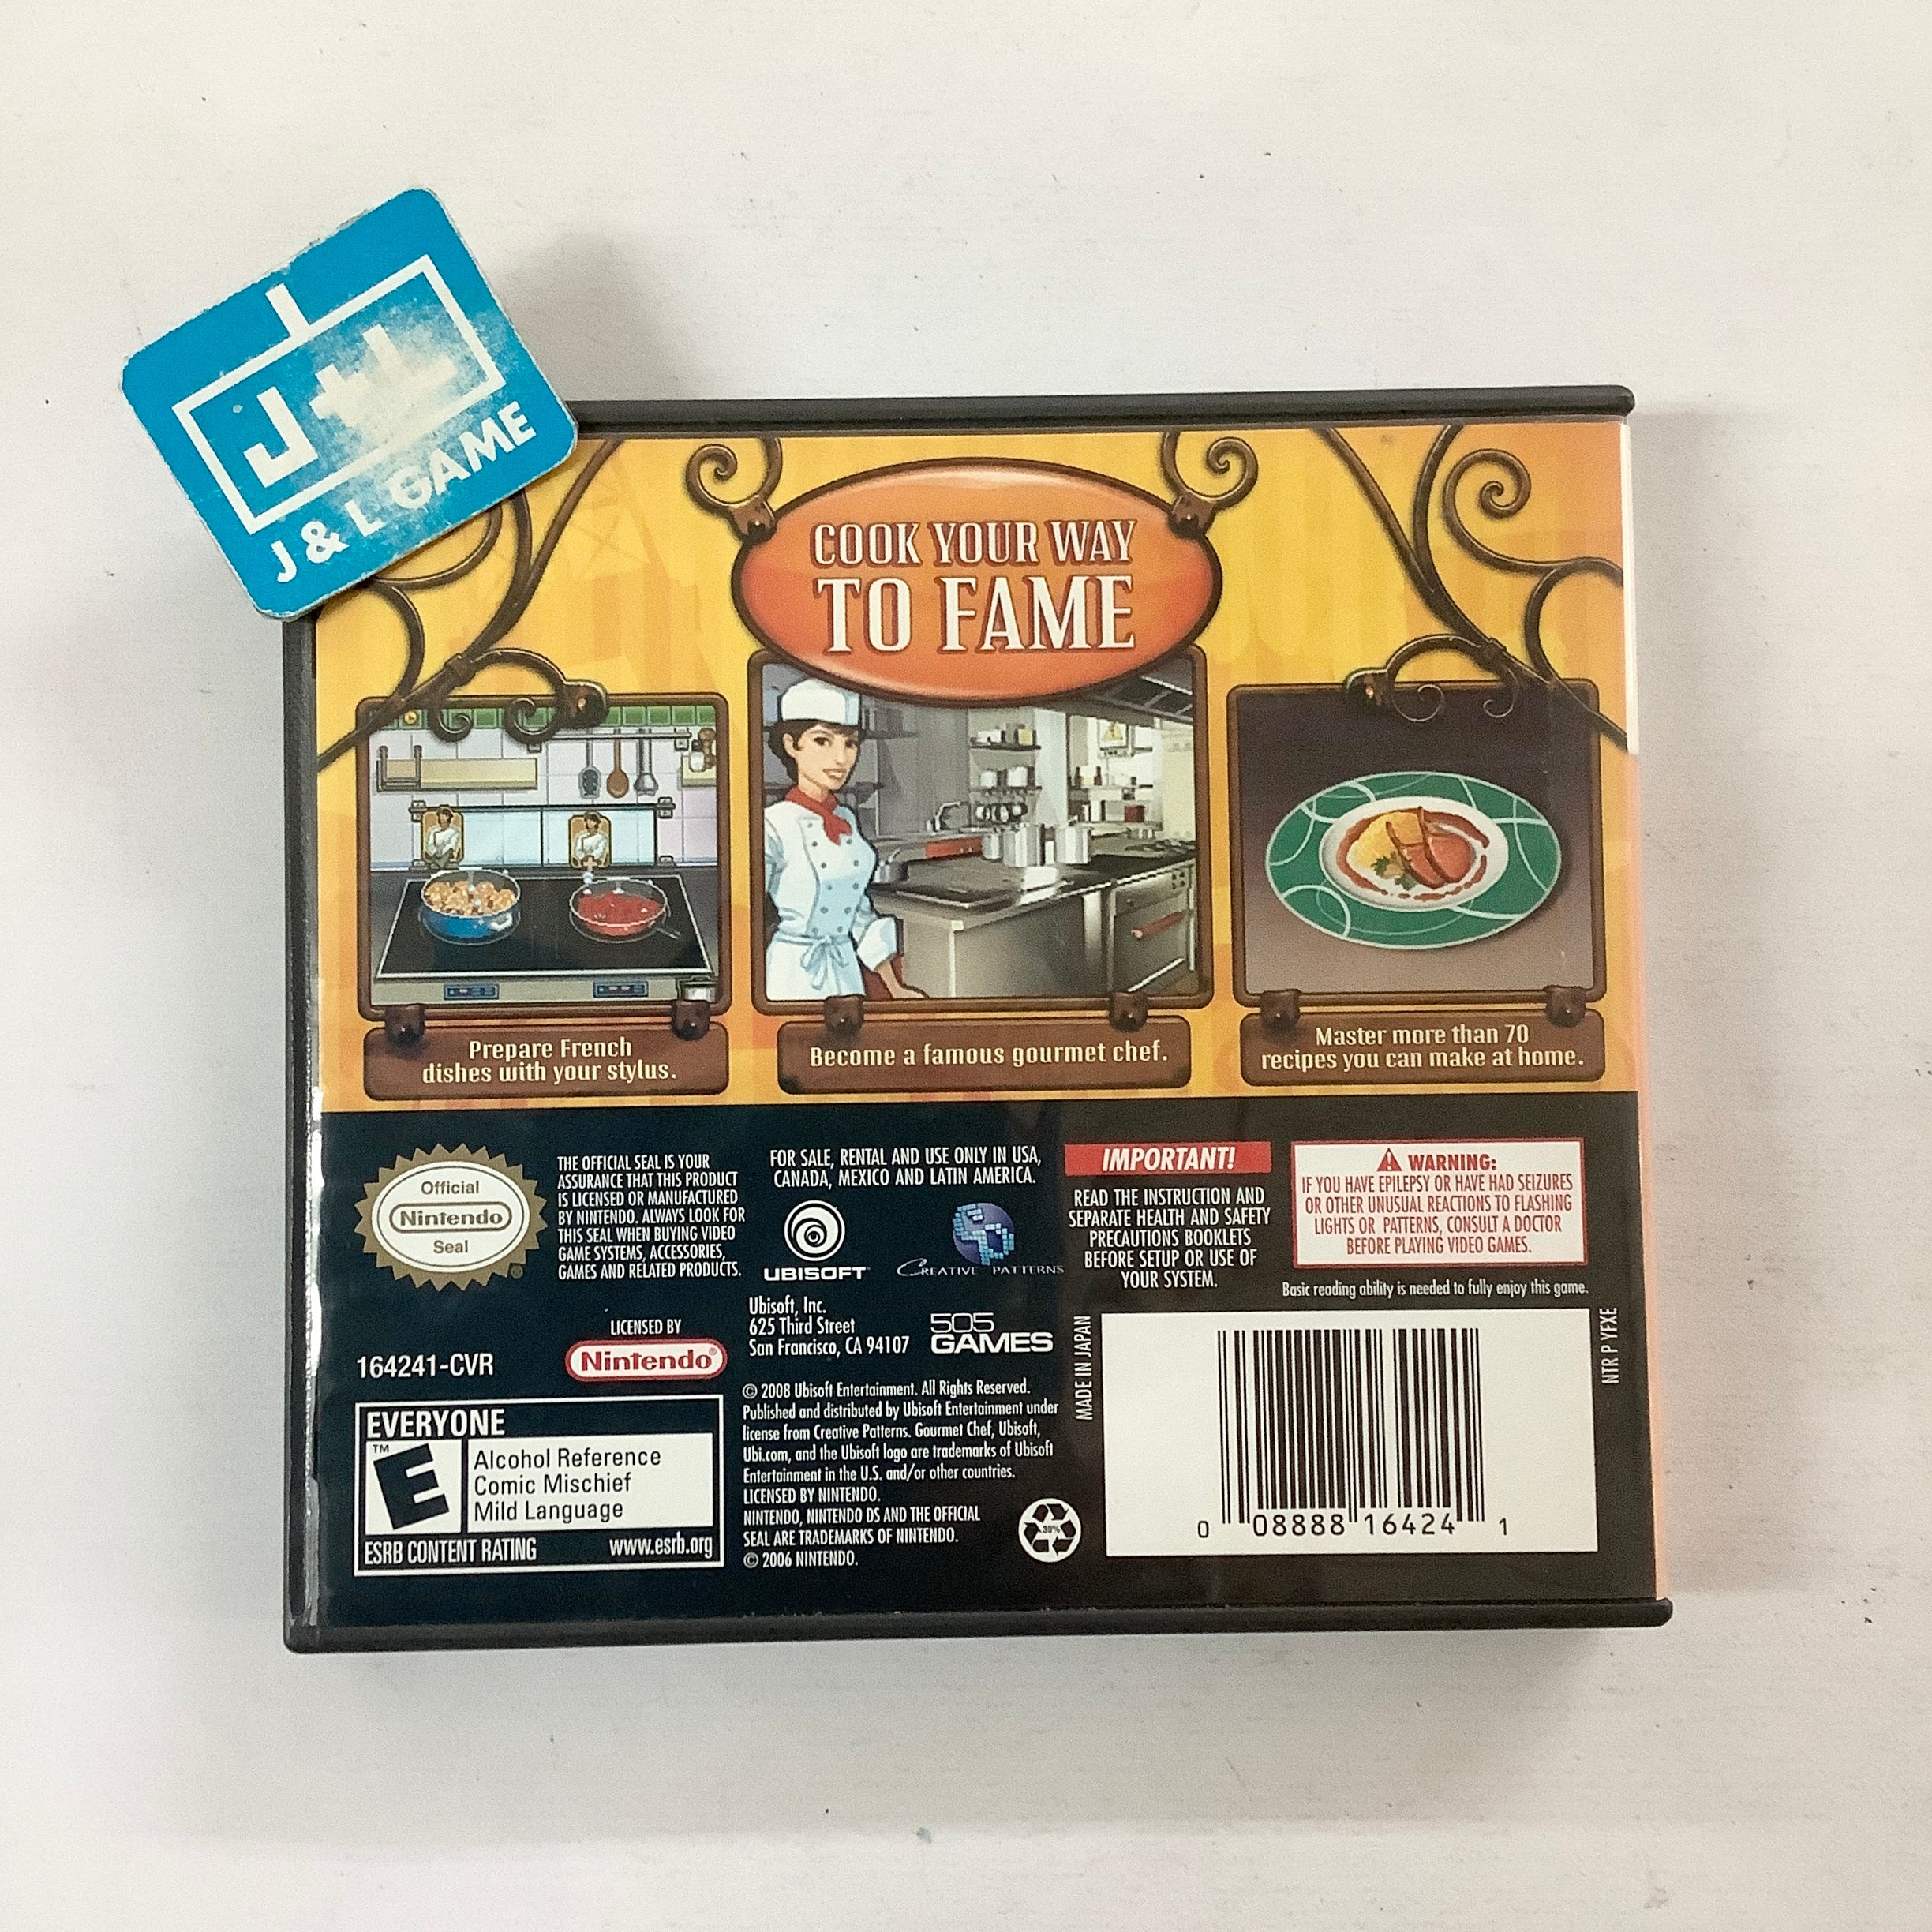 Gourmet Chef: Cook Your Way To Fame - (NDS) Nintendo DS [Pre-Owned] Video Games Ubisoft   